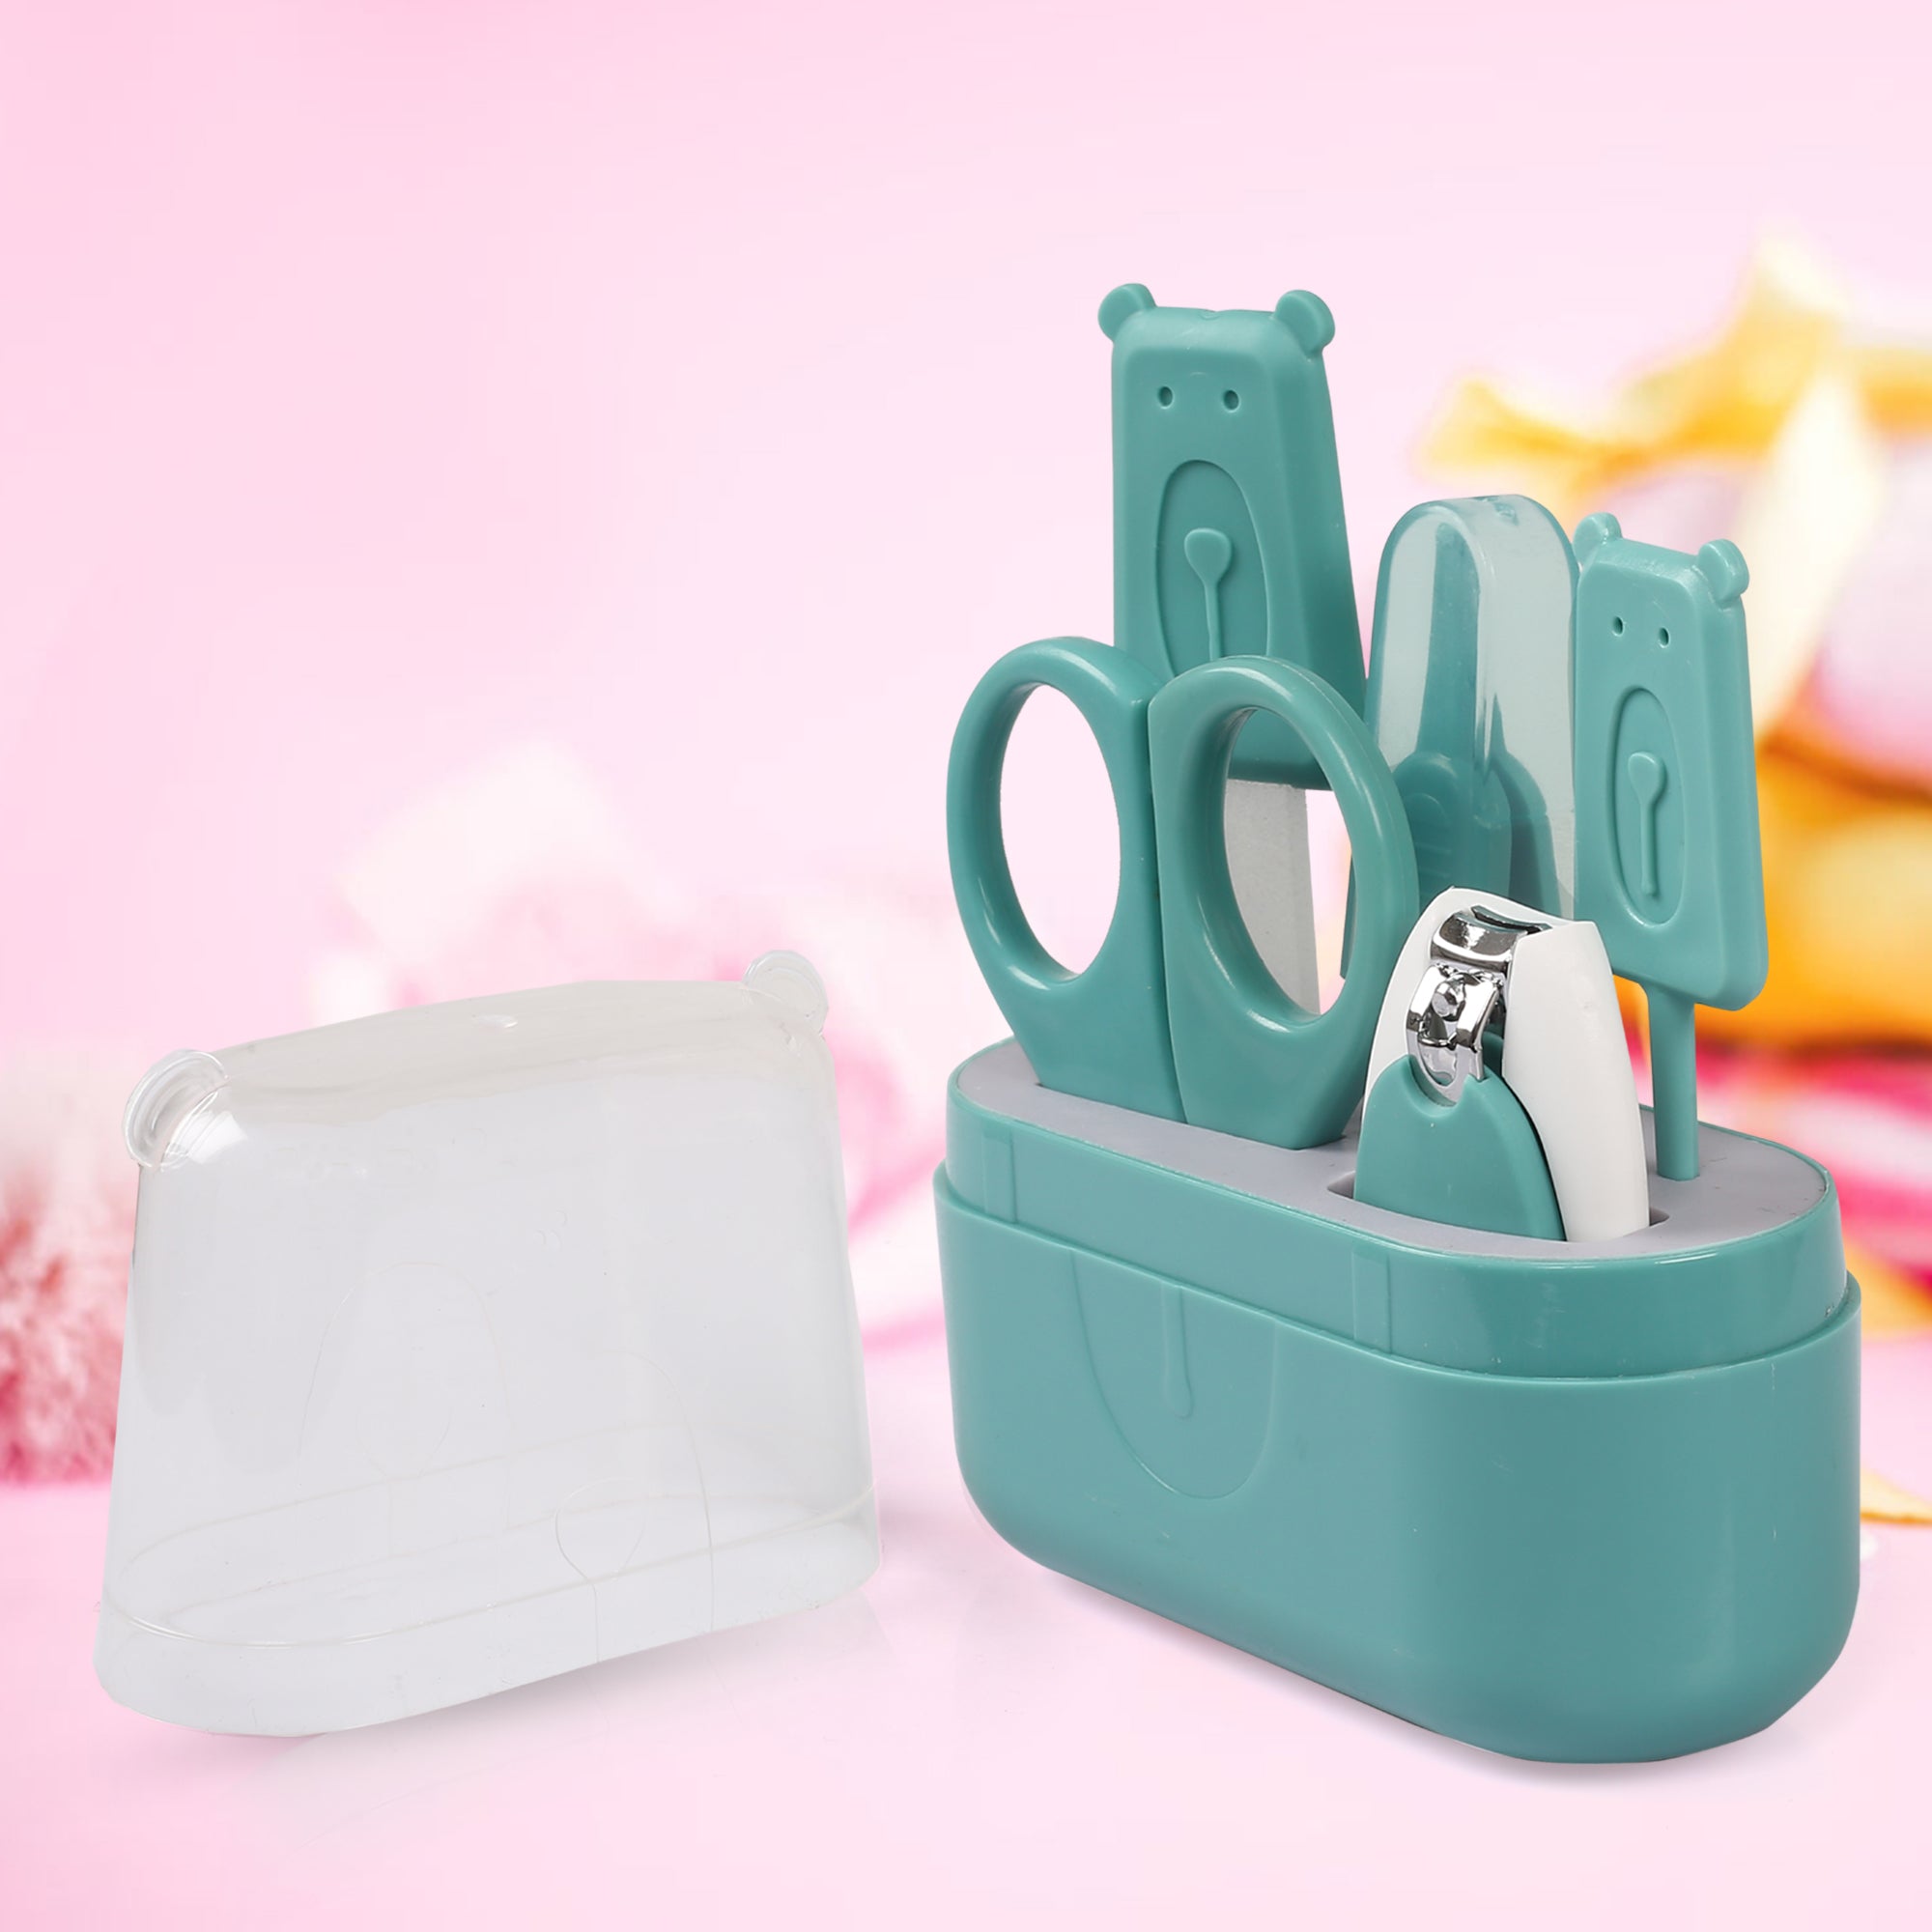 Teal Grooming Kit of 5 Pcs with a Nail Clipper - Baby Moo